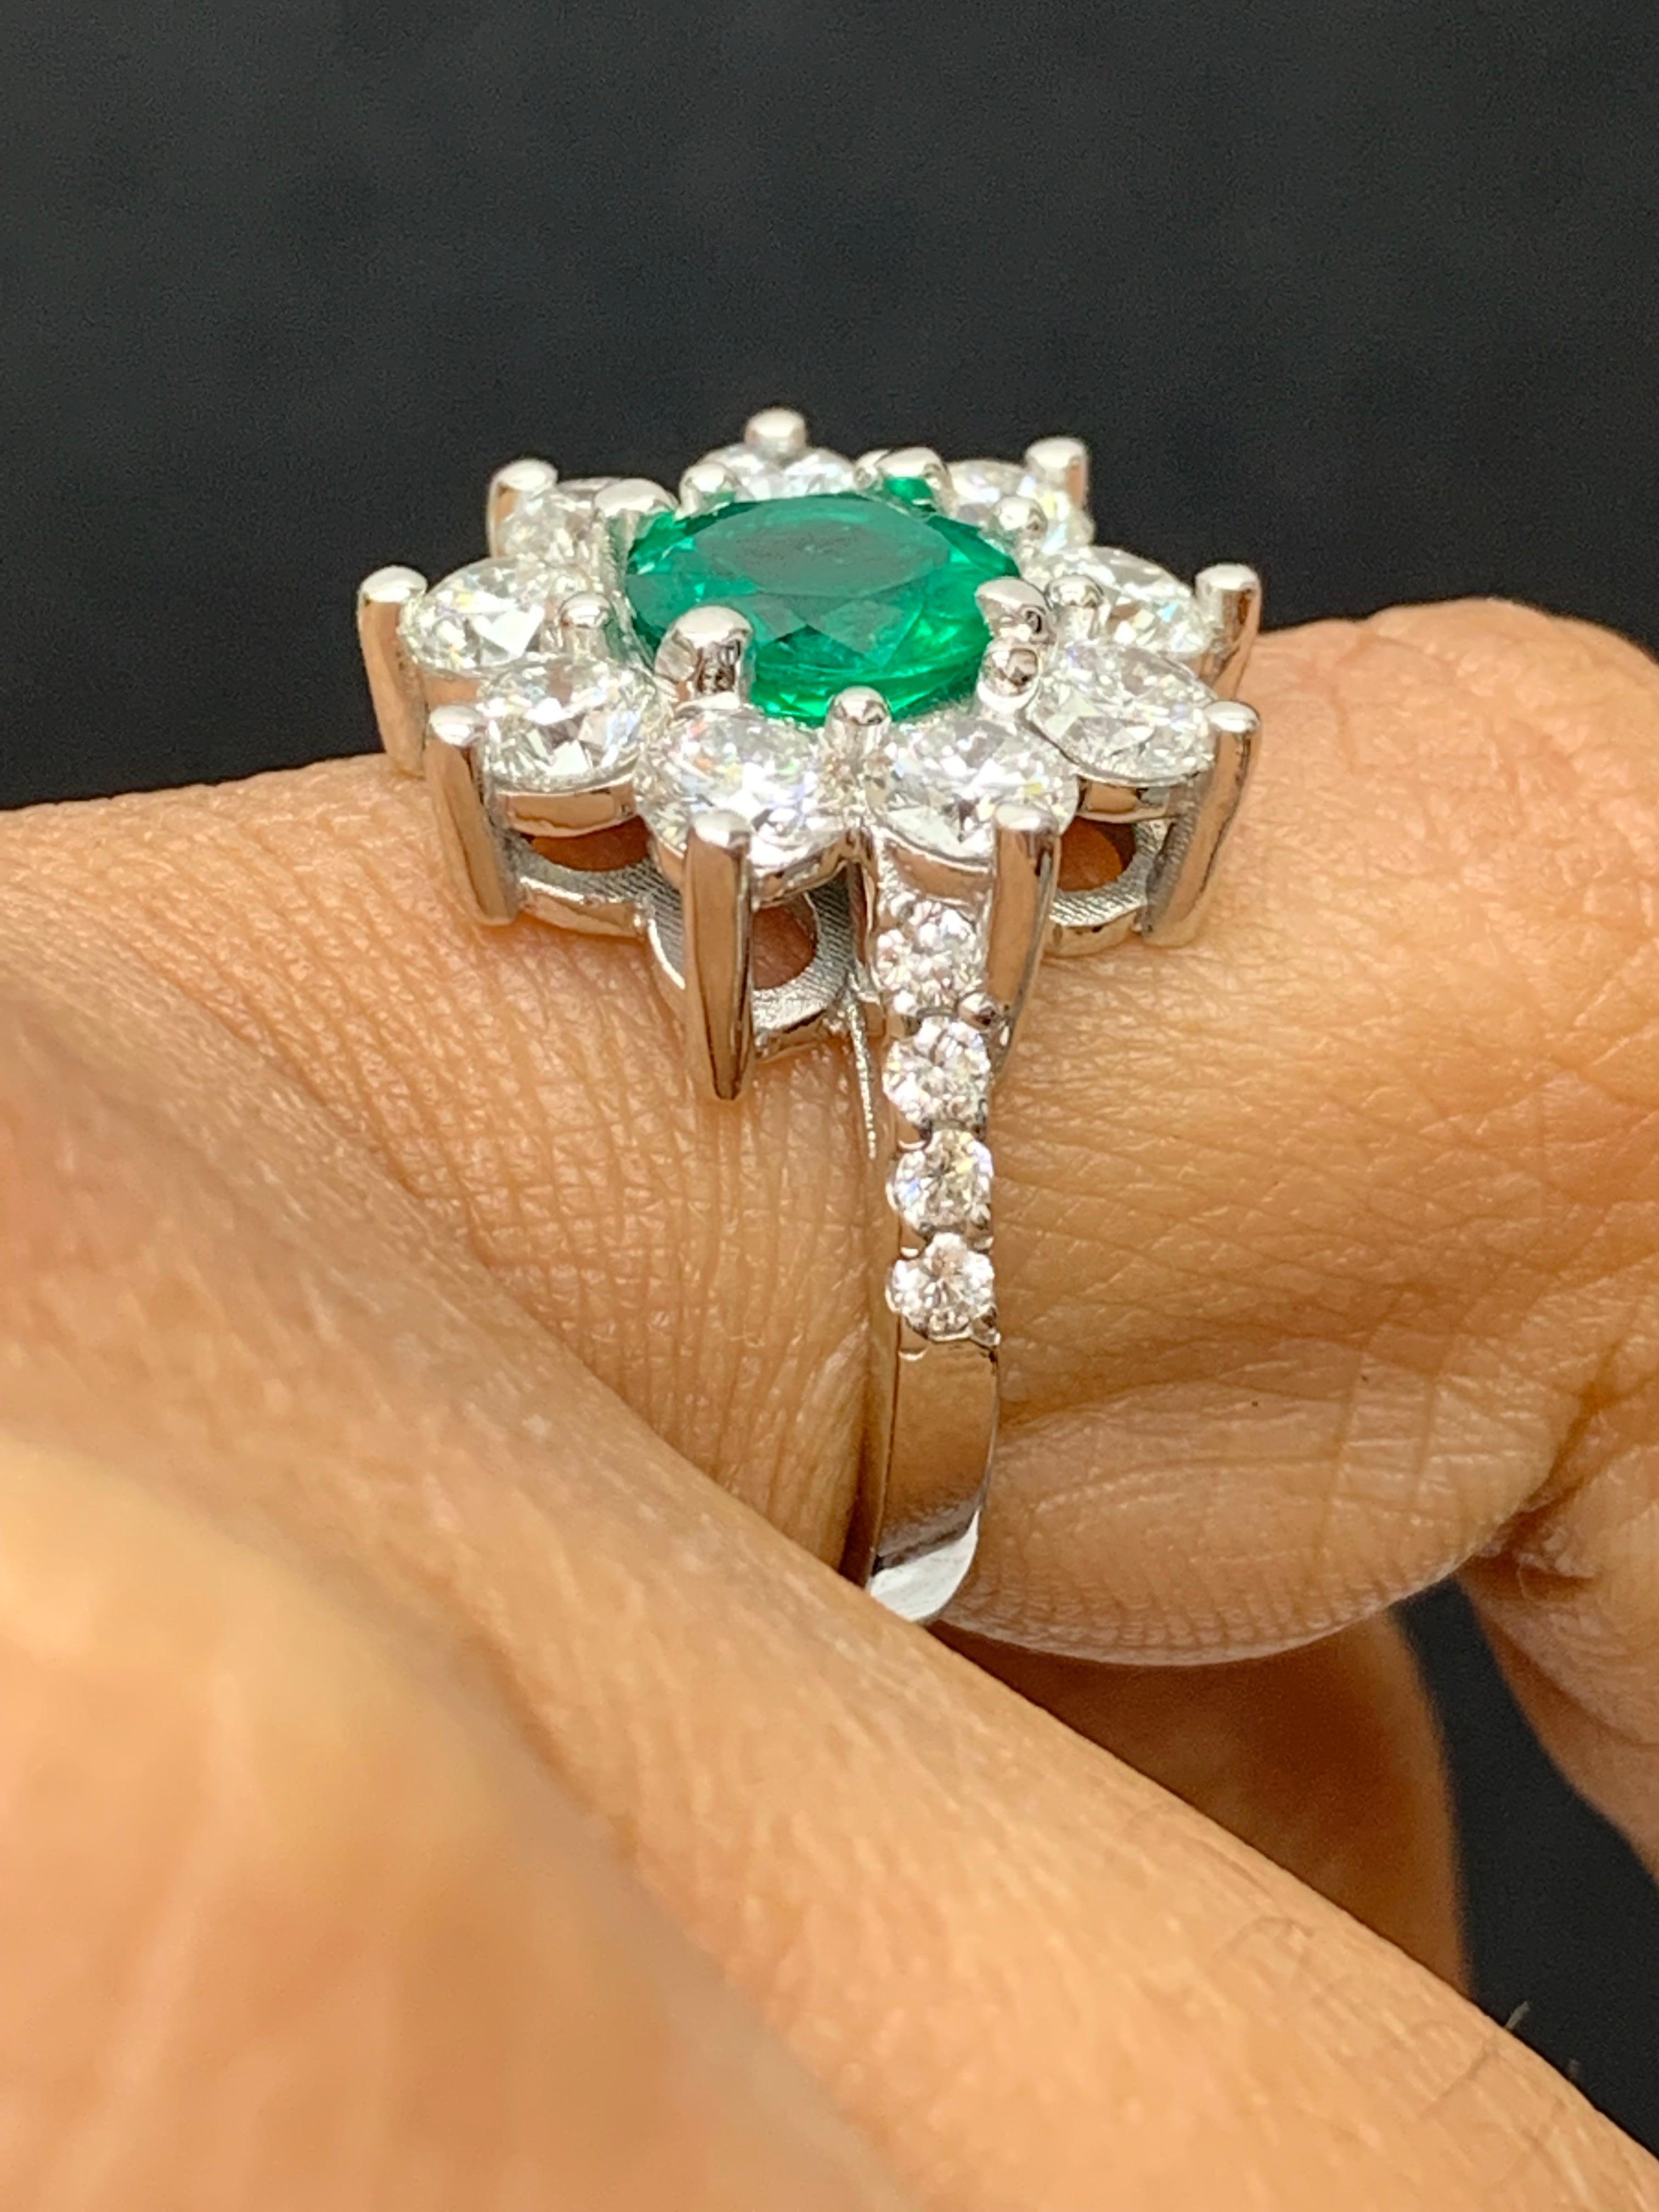 1.18 Carat Brilliant Cut Emerald and Diamond Ring in 14K White Gold For Sale 5